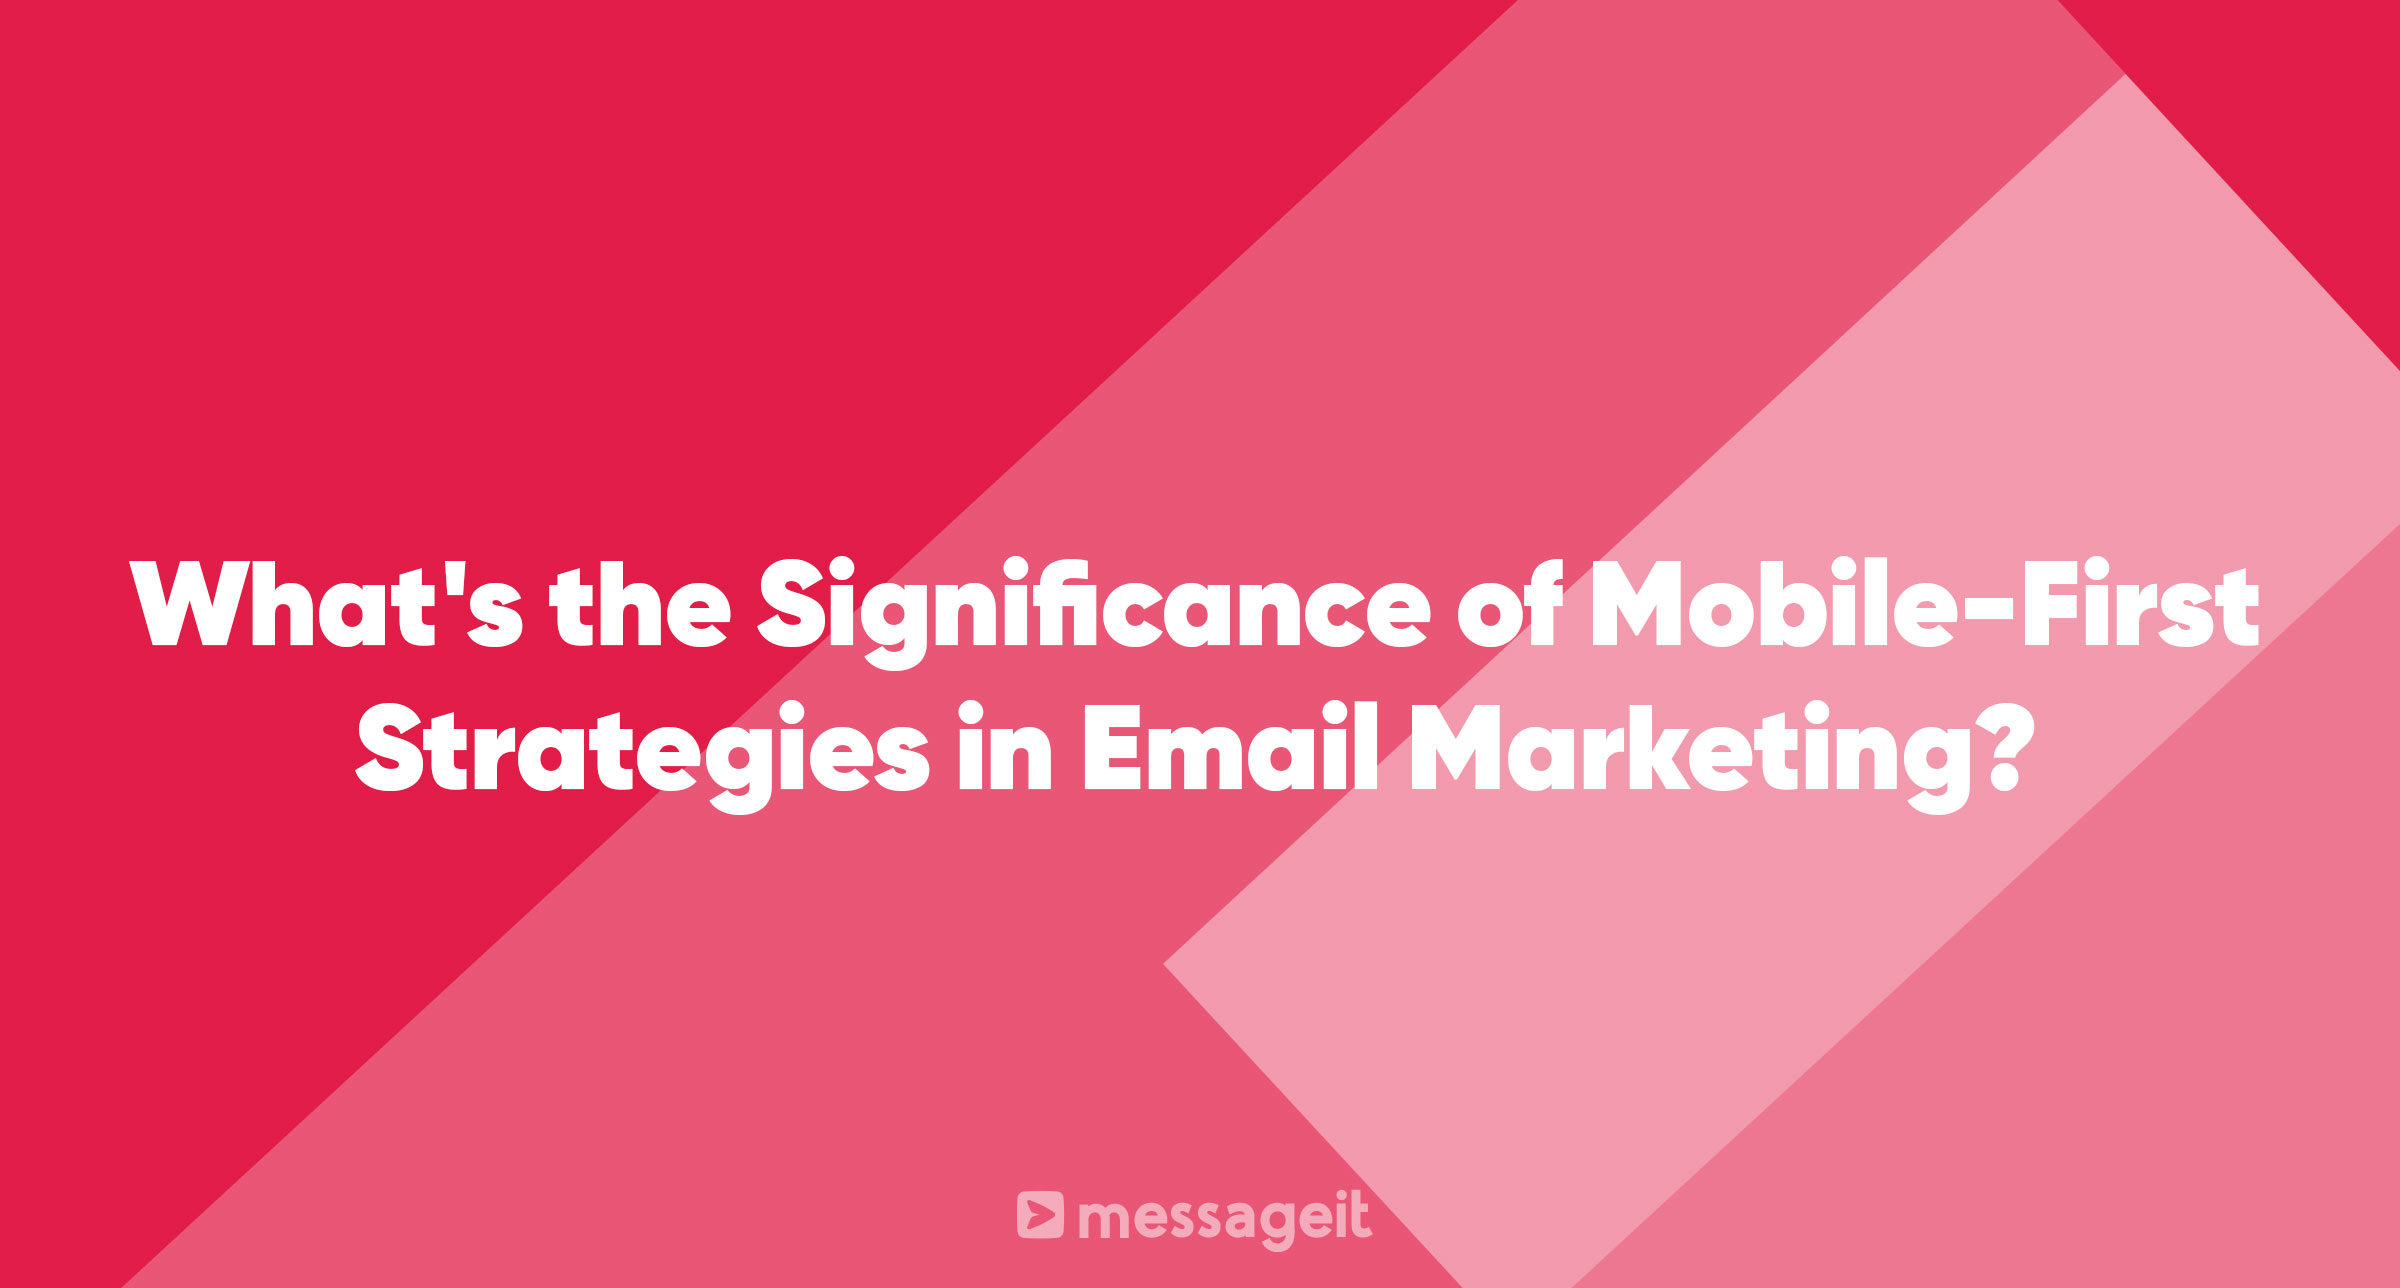 Article | What's the Significance of Mobile-First Strategies in Email Marketing?